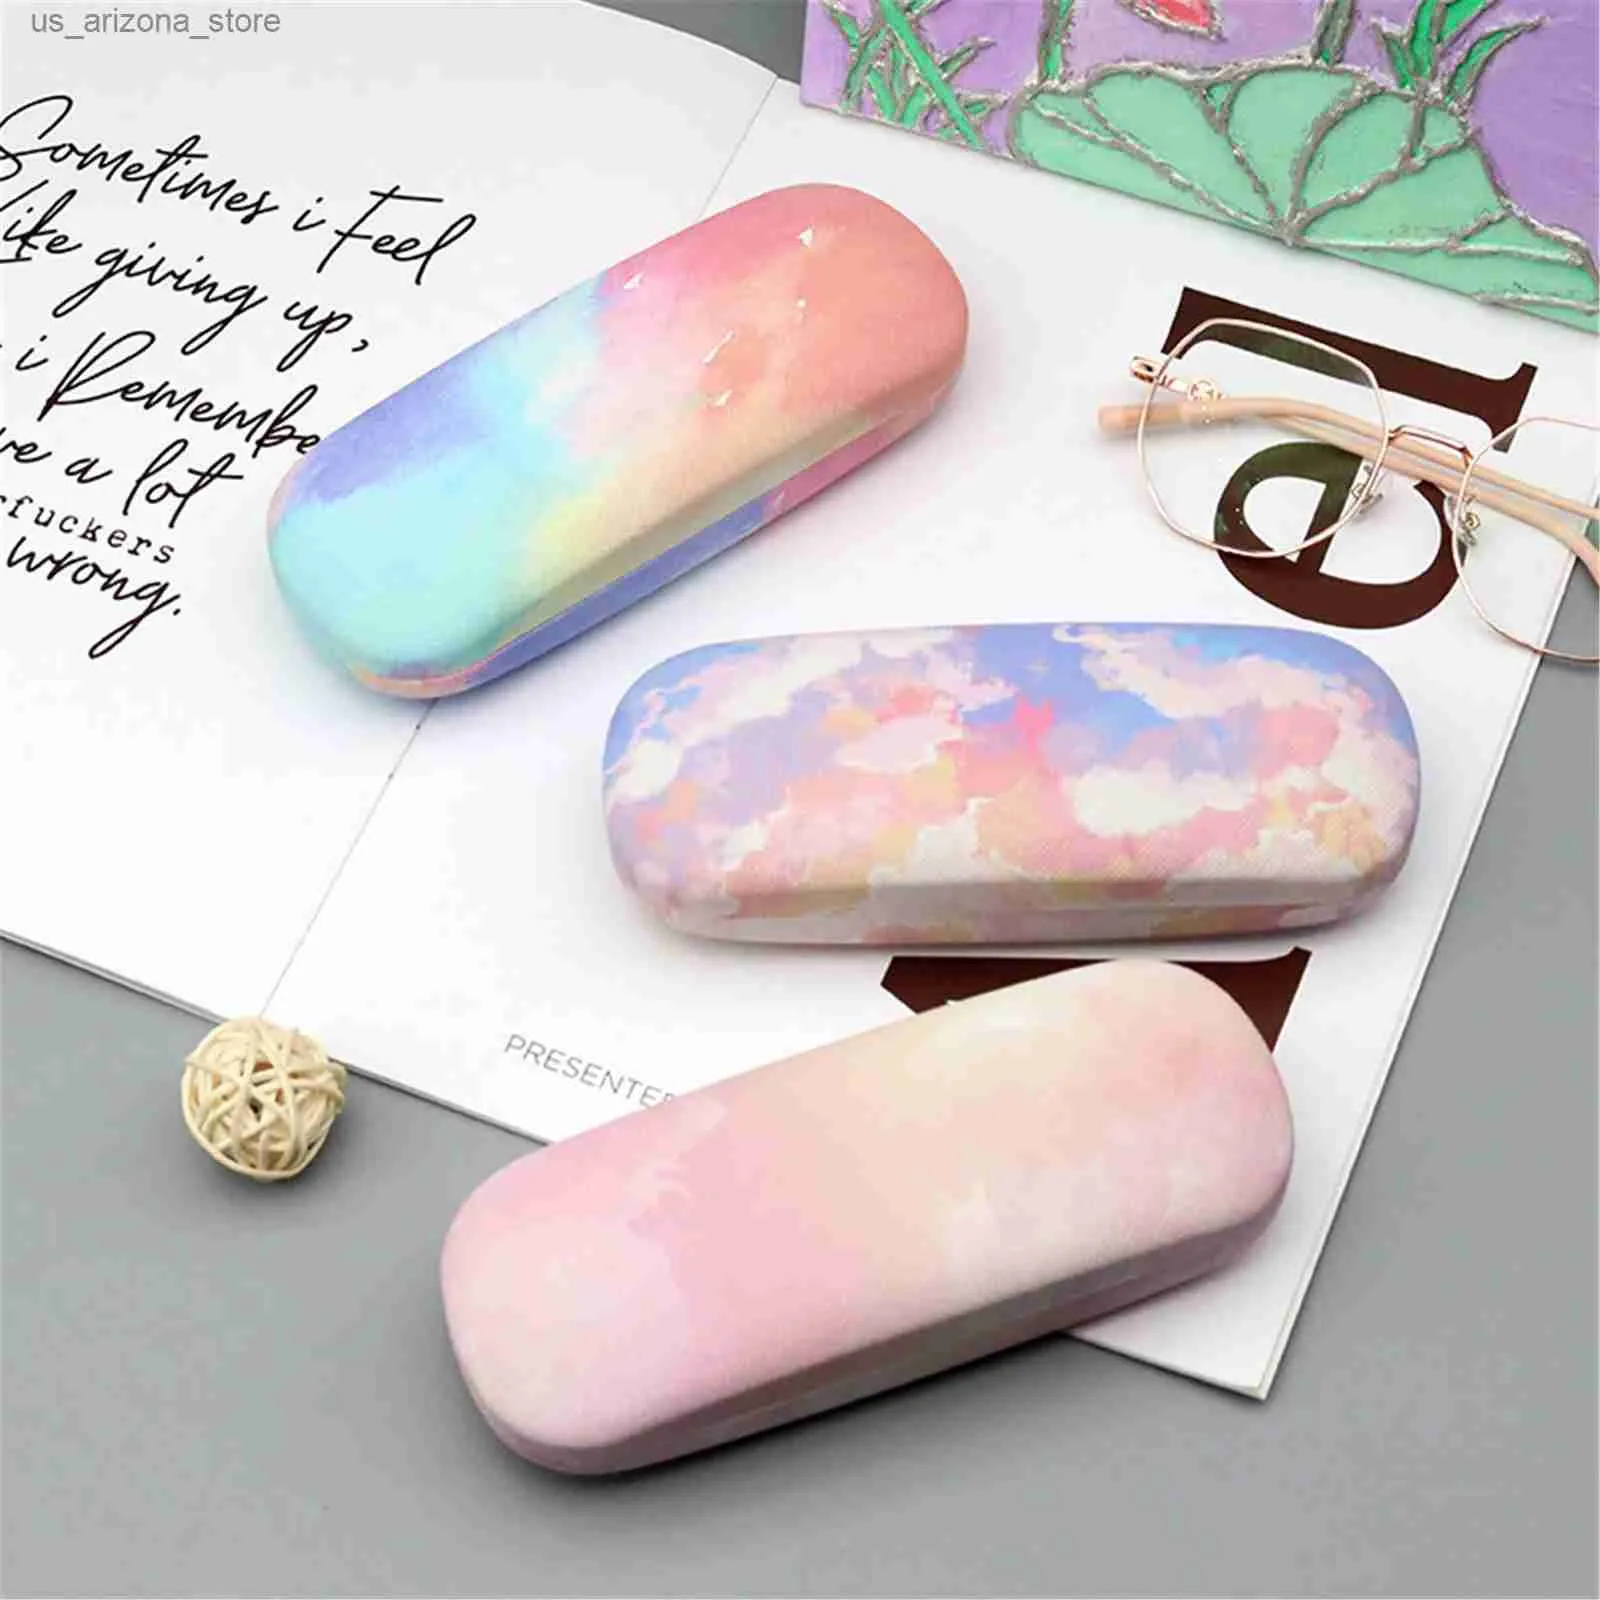 Sunglasses Cases Colored hard shell eyeglass case for women cute sunglasses students storage manager travel glasses organization Q240426